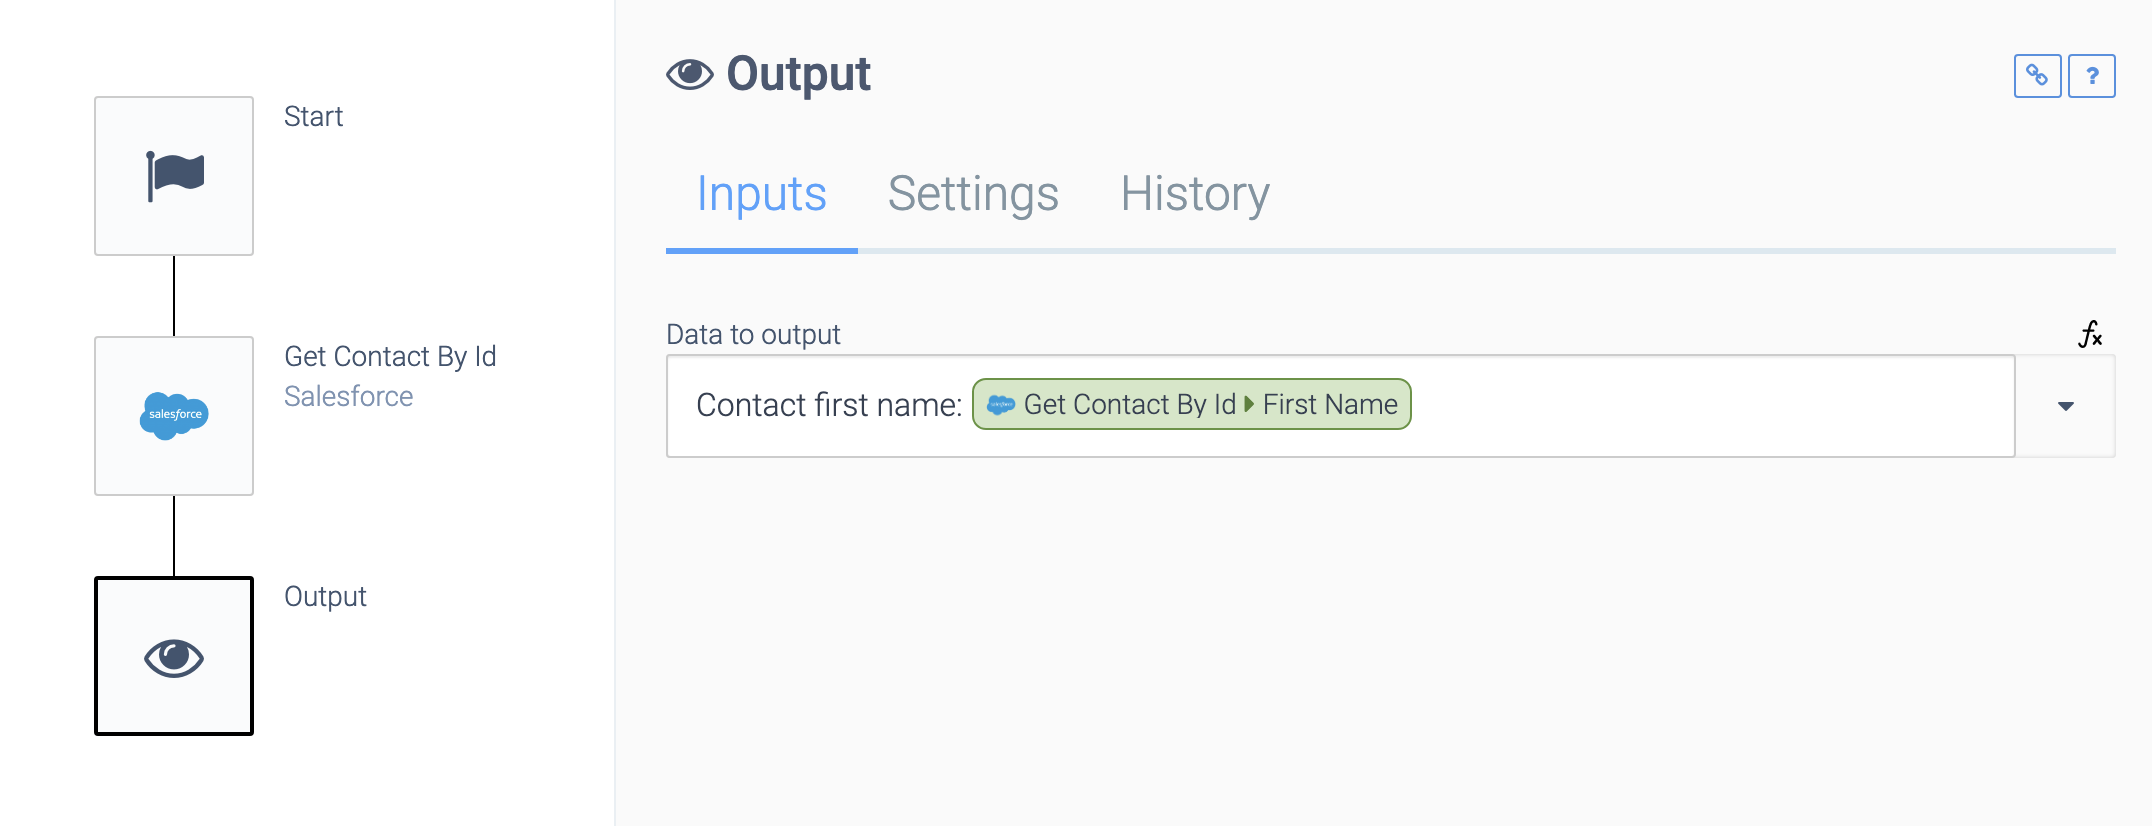 an automation consisting of a Start block, a Get Contact By Id block, and an Output block. The Output block is selected. The Data to output is set to: Contact first name: followed by data from the Get Contact By Id block.